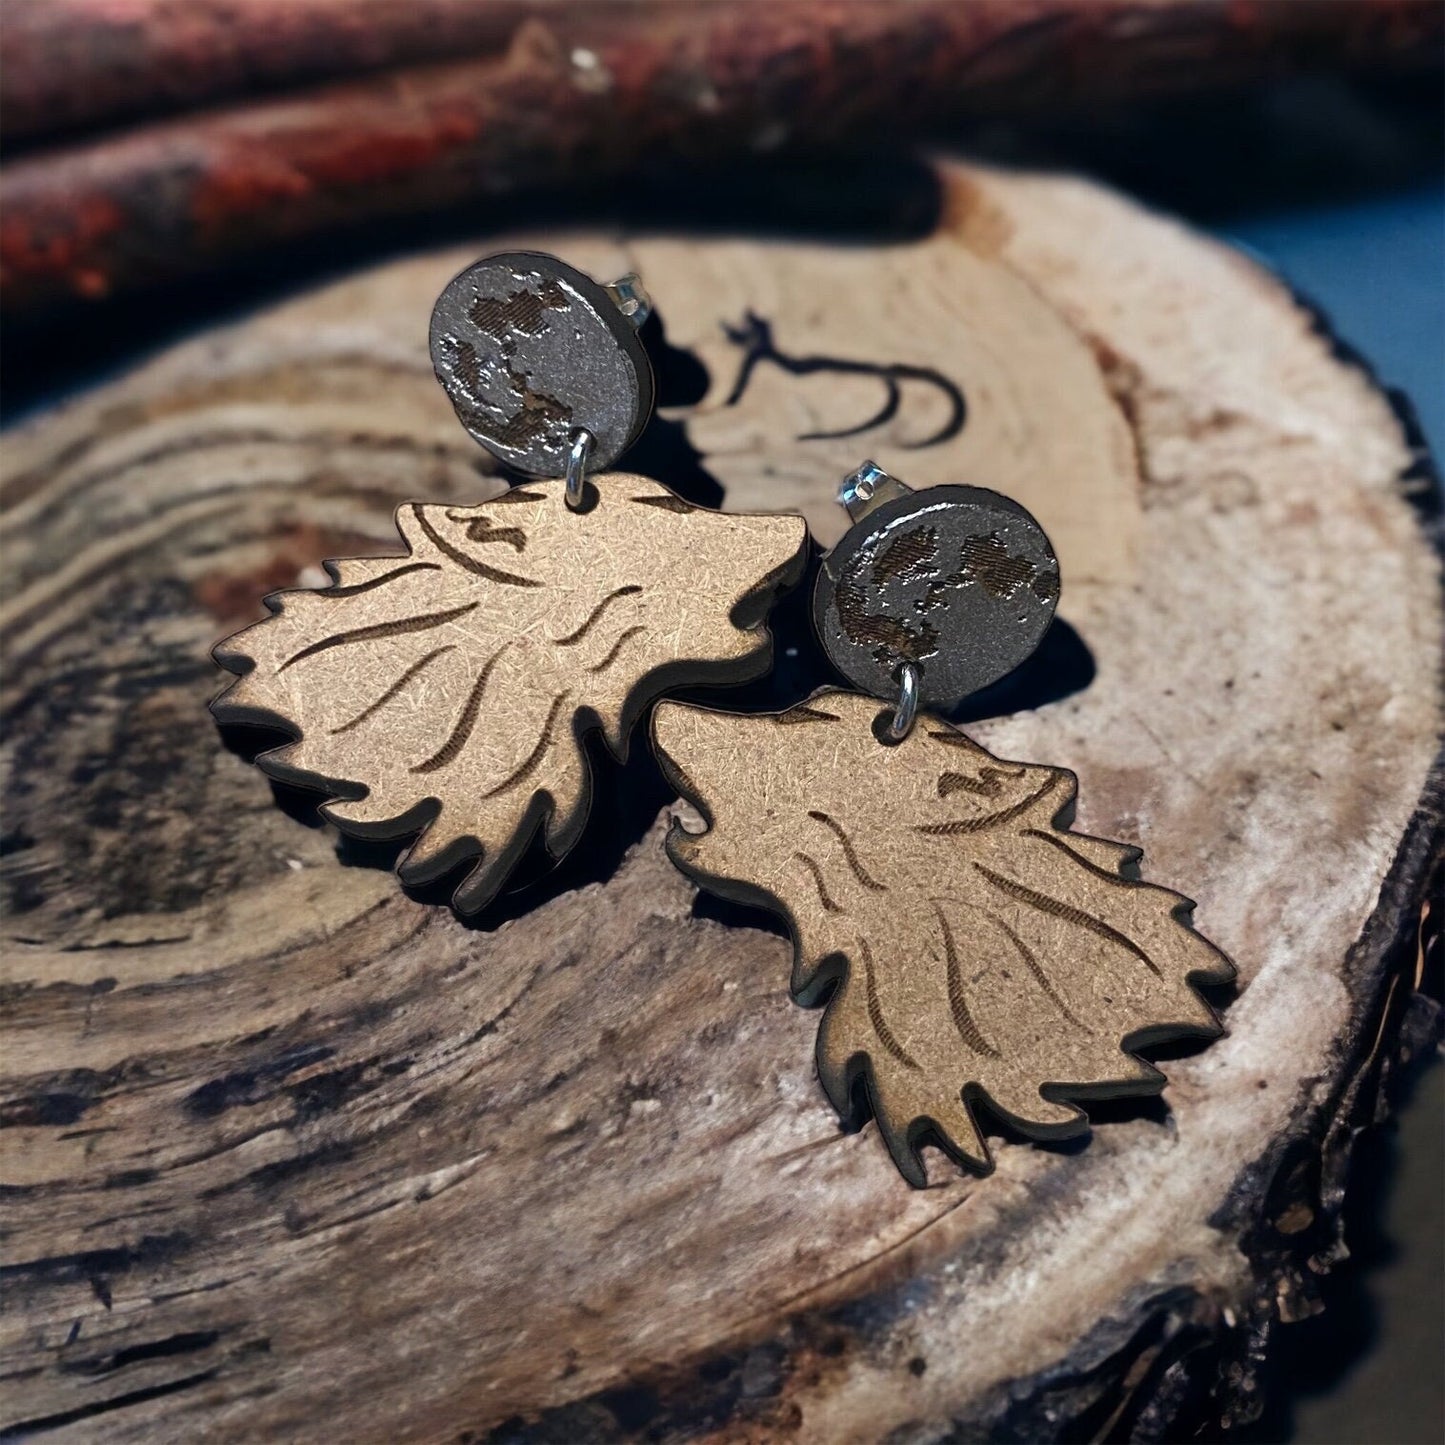 Howling At The Moon Wooden Earrings : Dark Forest Vibes - Full Moon Jewelry - Wooden Jewelry - Halloween Décor - Wolf & Moons - Stud Earring